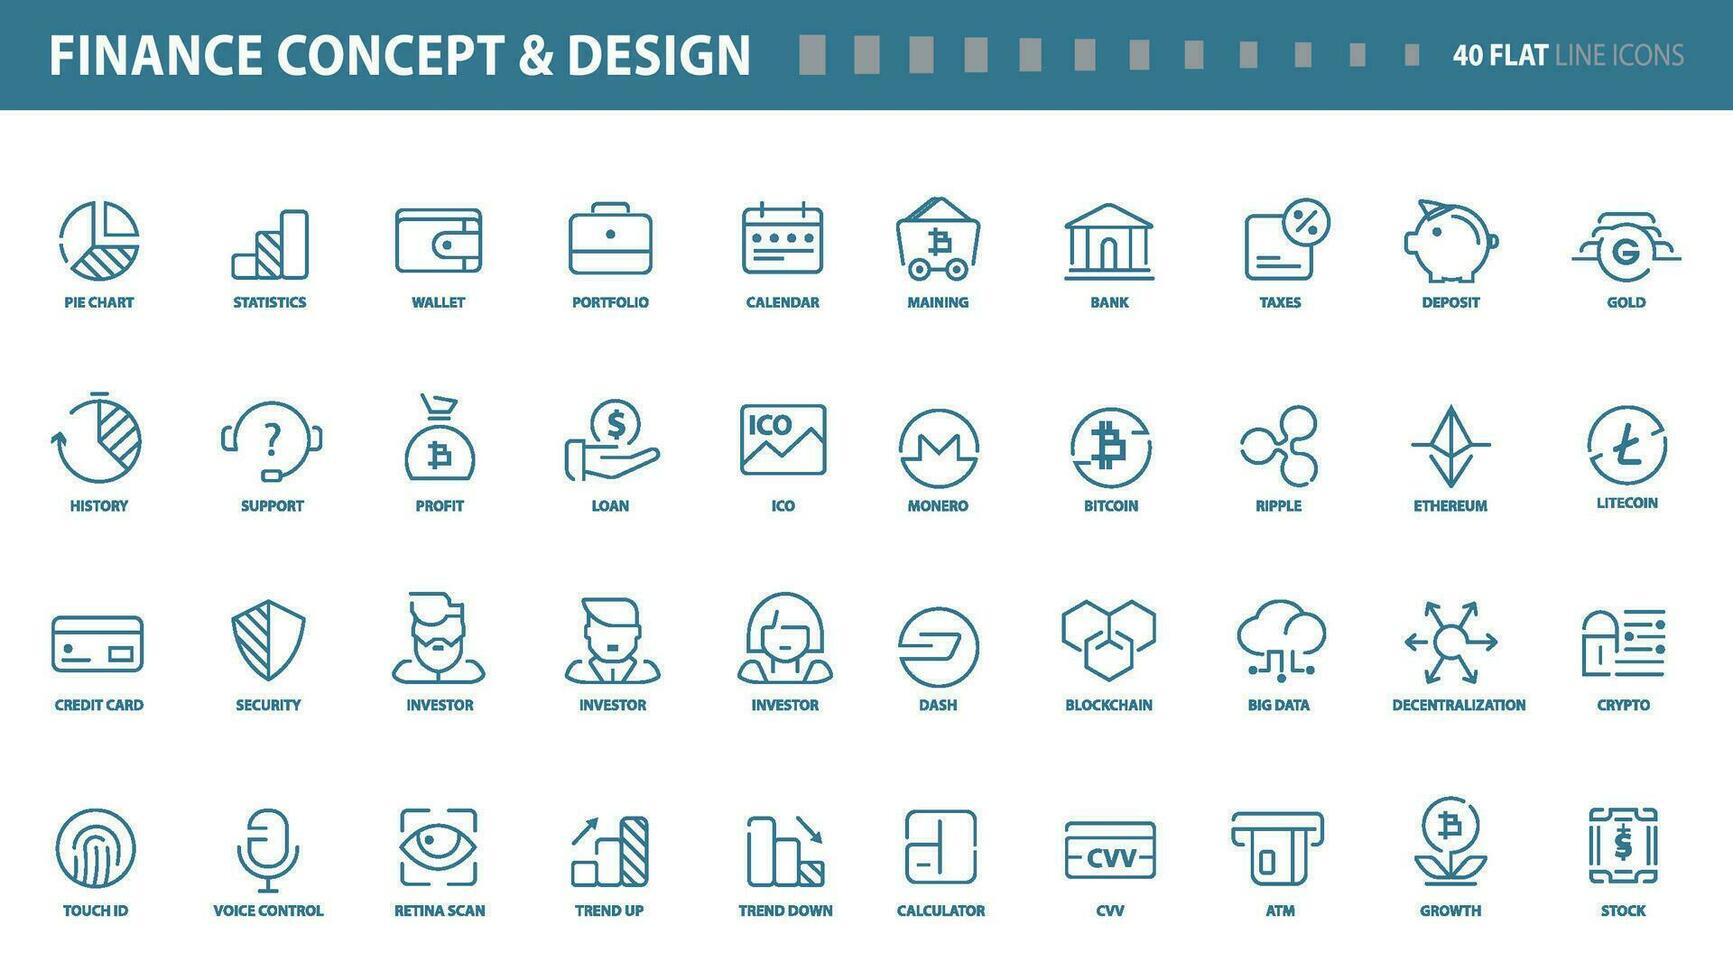 Set of flat line icons of finance concept and design. Vector concepts for website and app design and development.